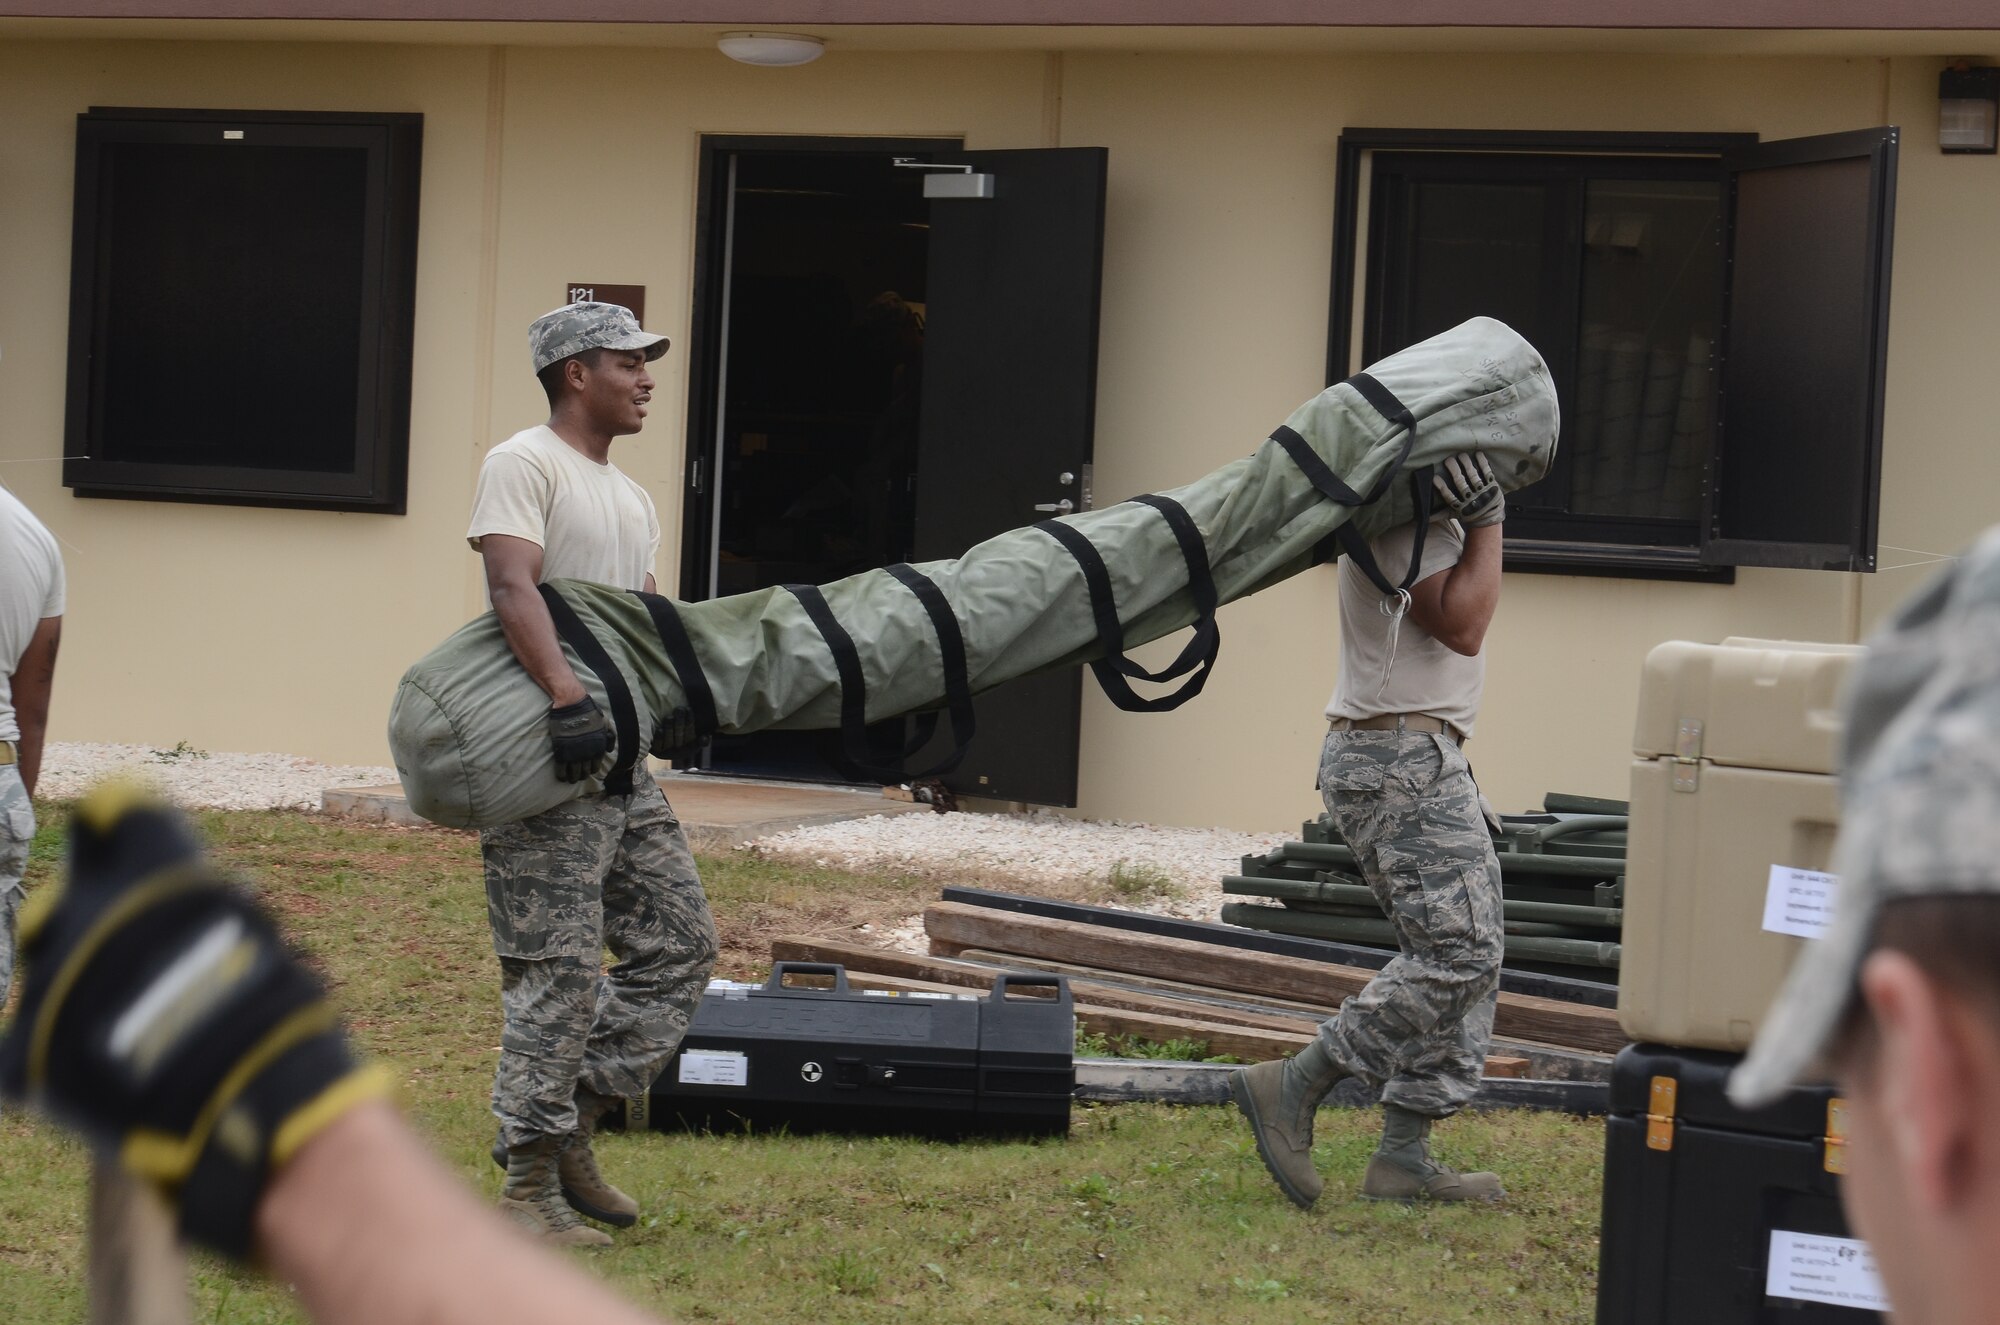 Airmen from the 644th Combat Communications Squadron relocate equipment in preparation for Exercise Beverly Palms 13-05 on Andersen Air Force Base, Guam, Sept. 9, 2013. During the exercise, Andersen Airmen practiced their ability to react, defend and execute operations in a wartime scenario. (U.S. Air Force photo by Airman 1st Class Adarius Petty/Released)